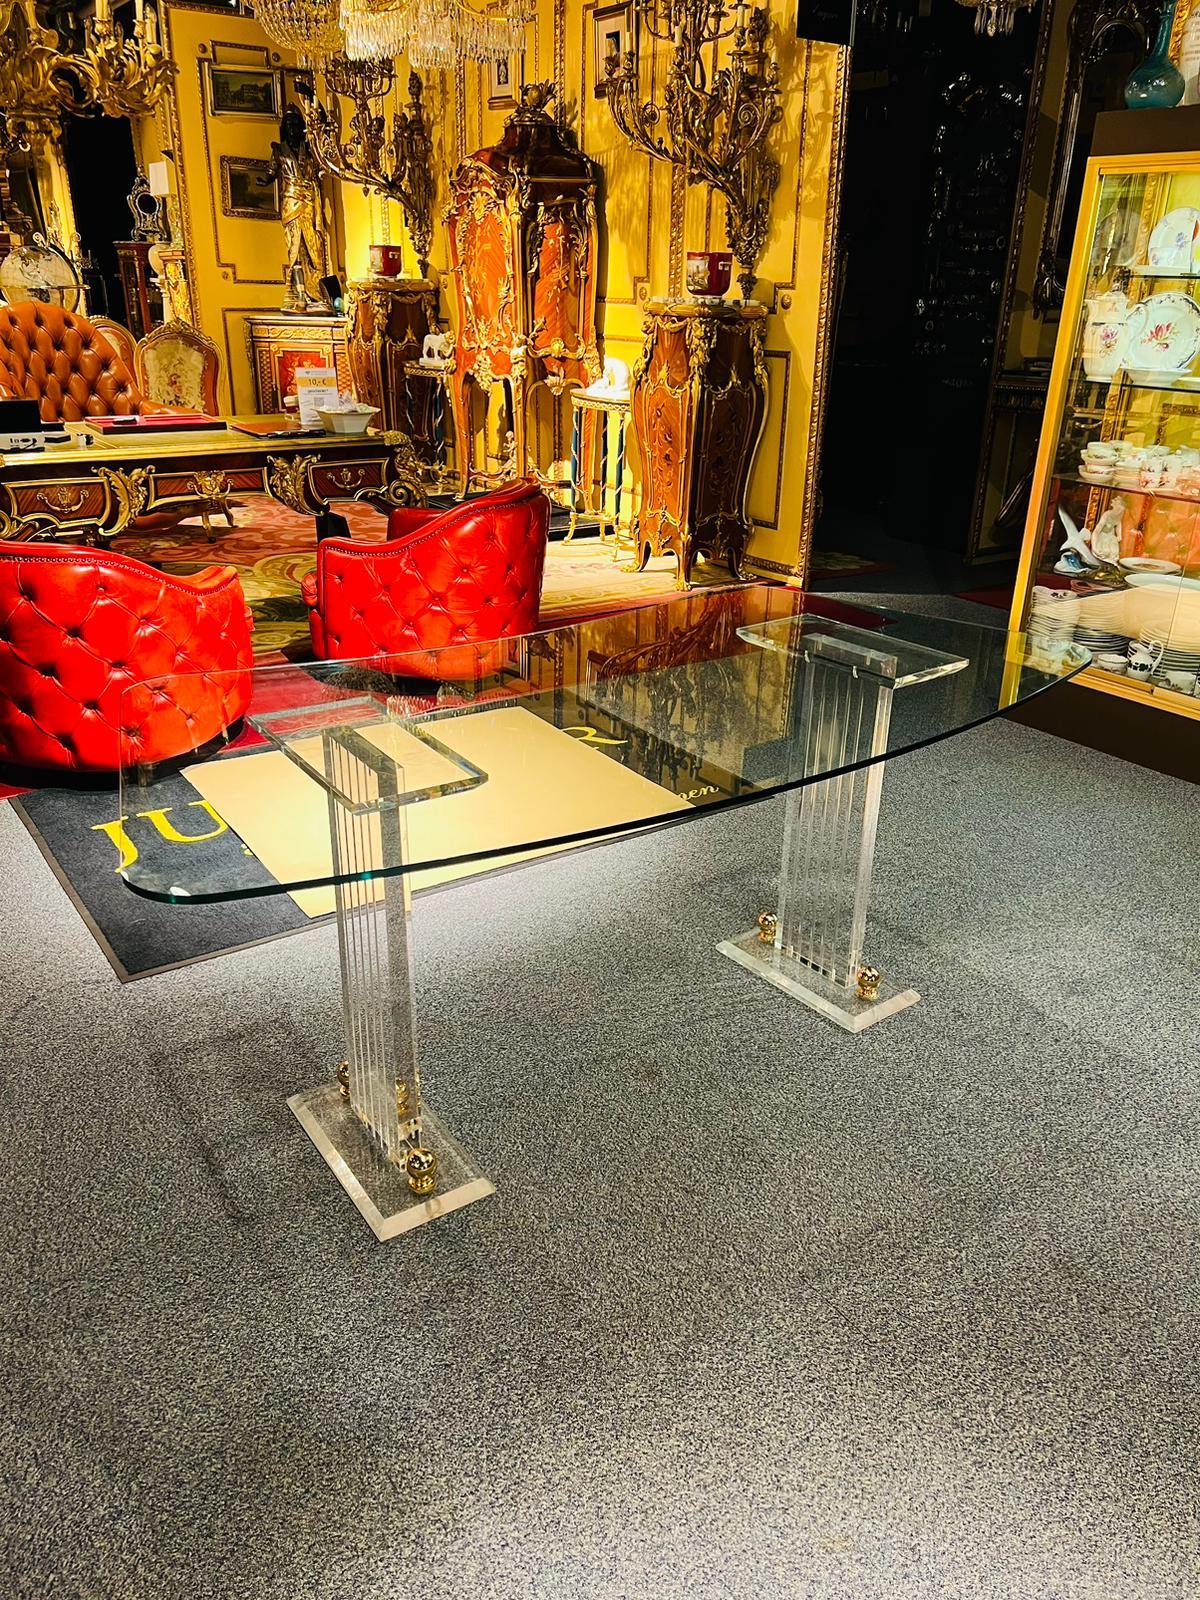 High quality acrylic desk stands on2 acrylic columns / Pillars with beautiful shape and gold accessories on the feet. The glass top is removable and a bit curved

Made in Italy.